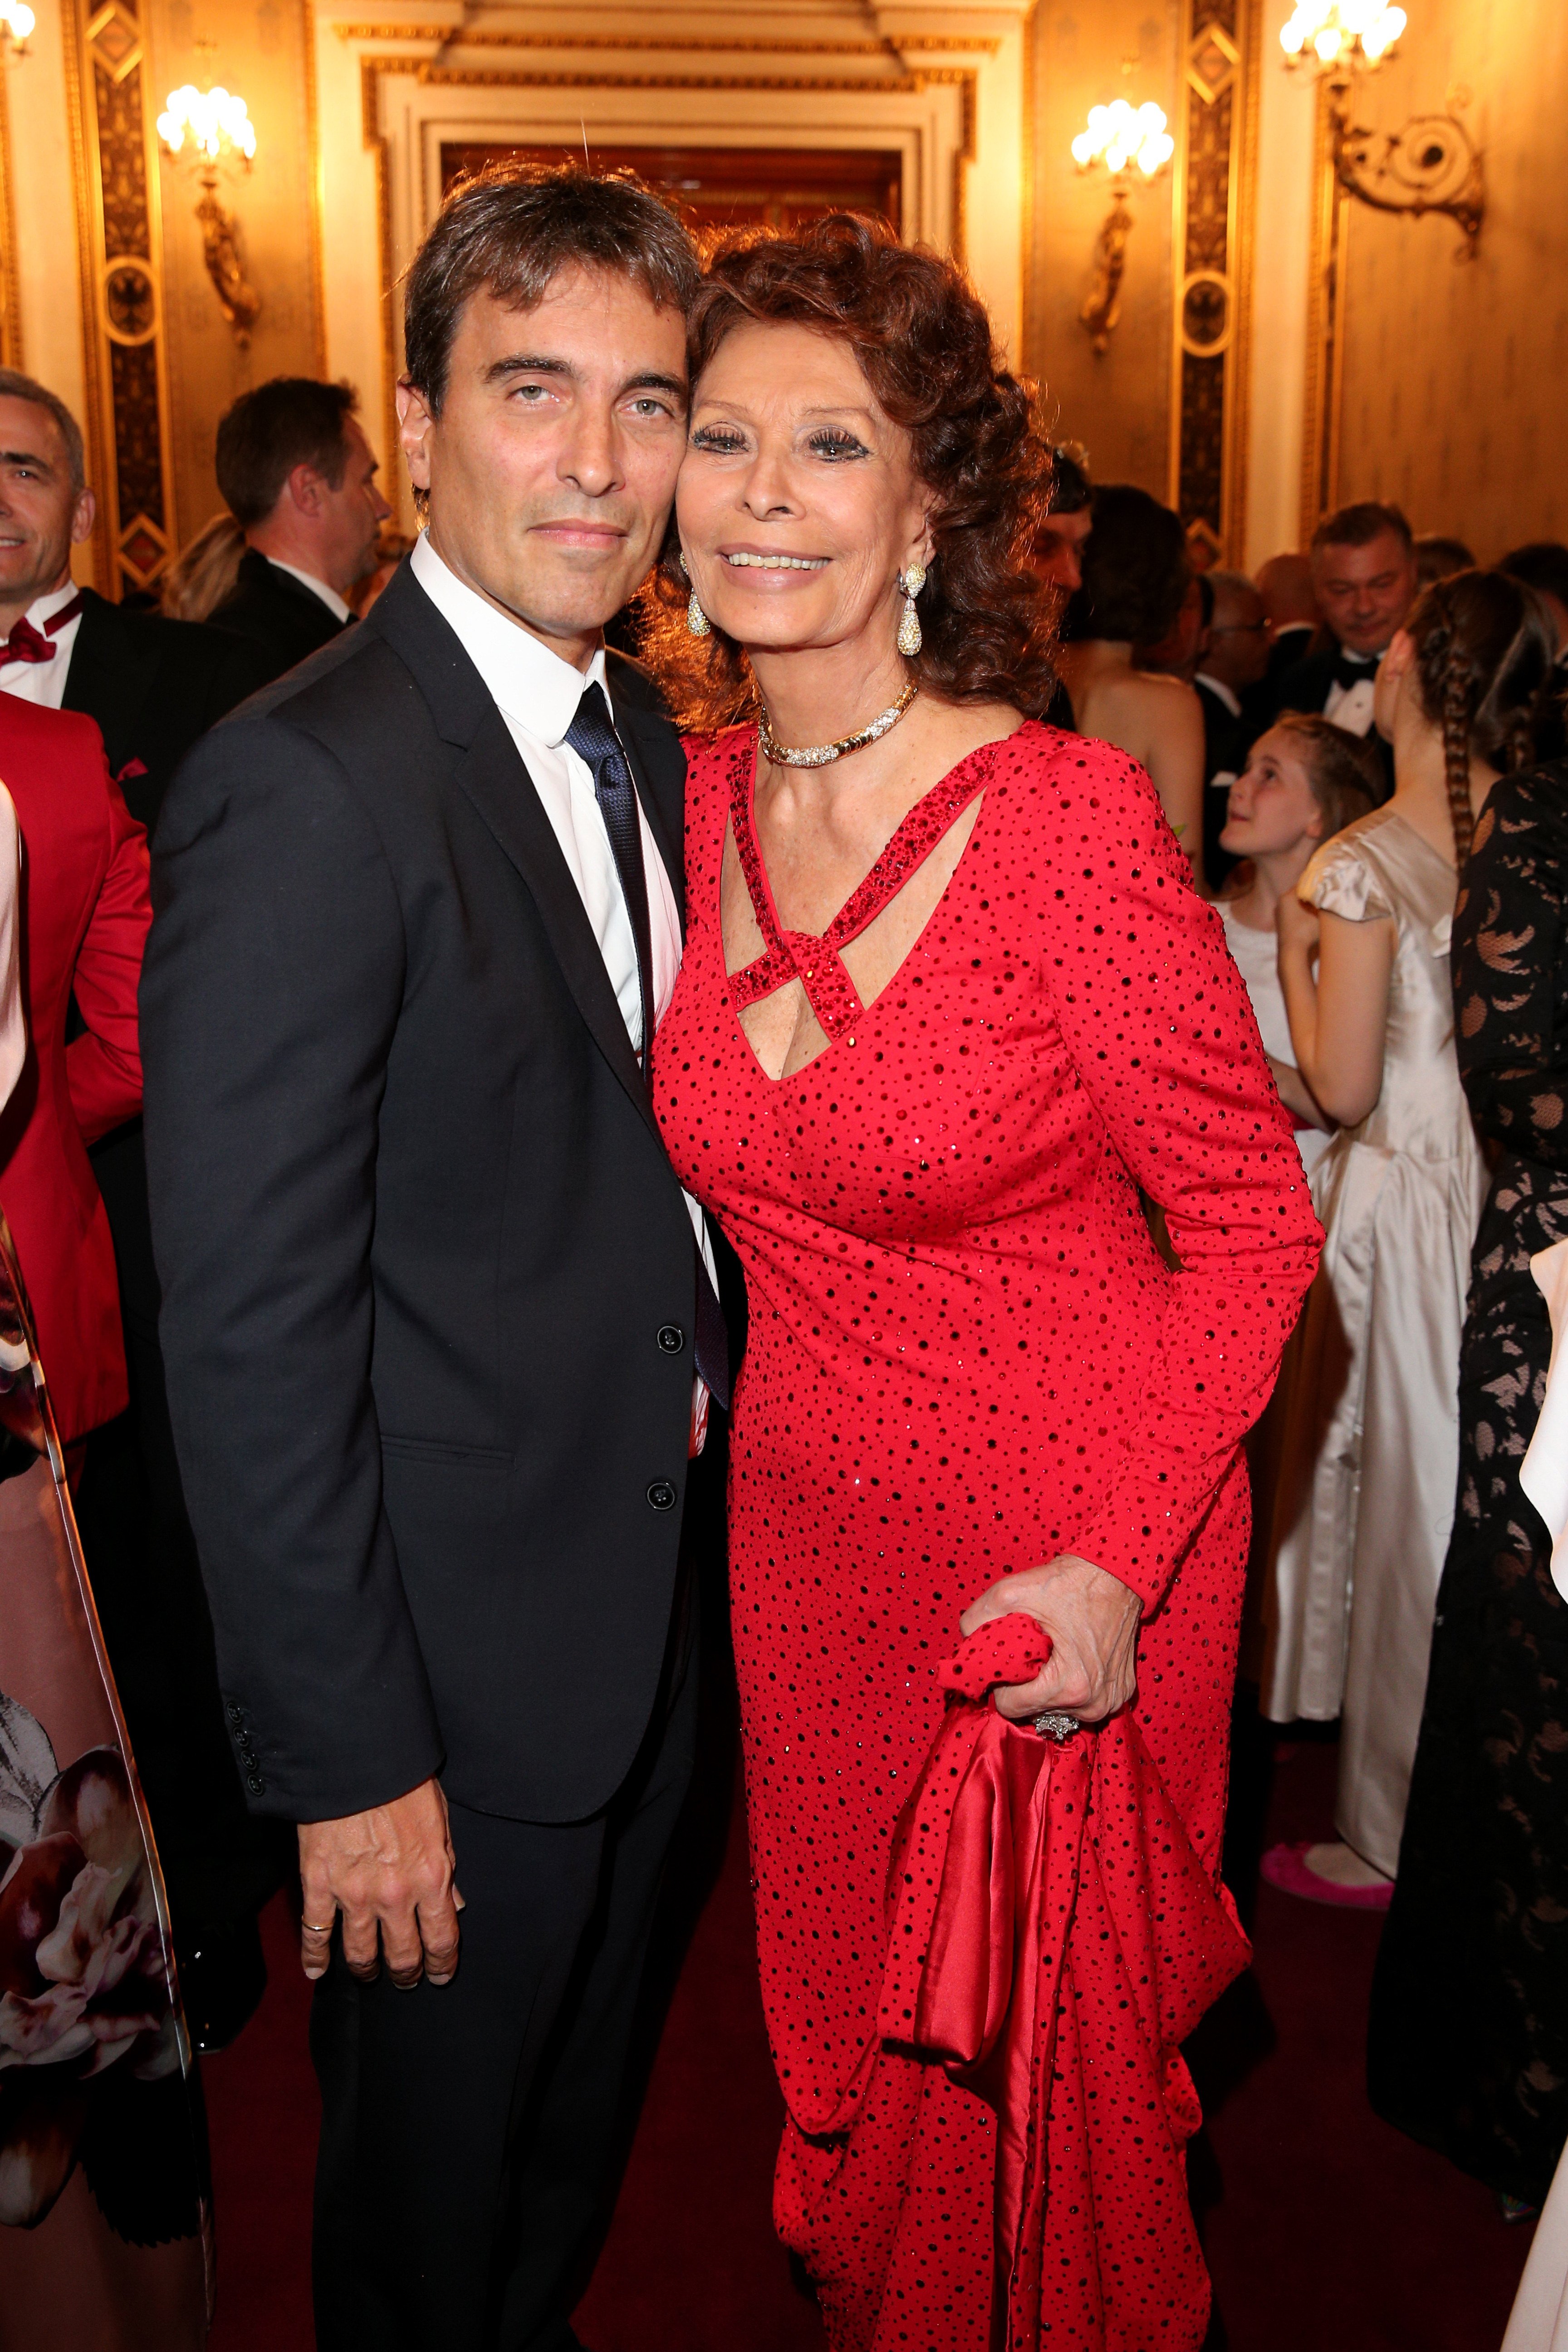 Sophia Loren and her son Carlo Ponti Jr. during the European Cultural Award 'Taurus' at Vienna State Opera on October 20, 2019 in Vienna, Austria. | Photo: Getty Images